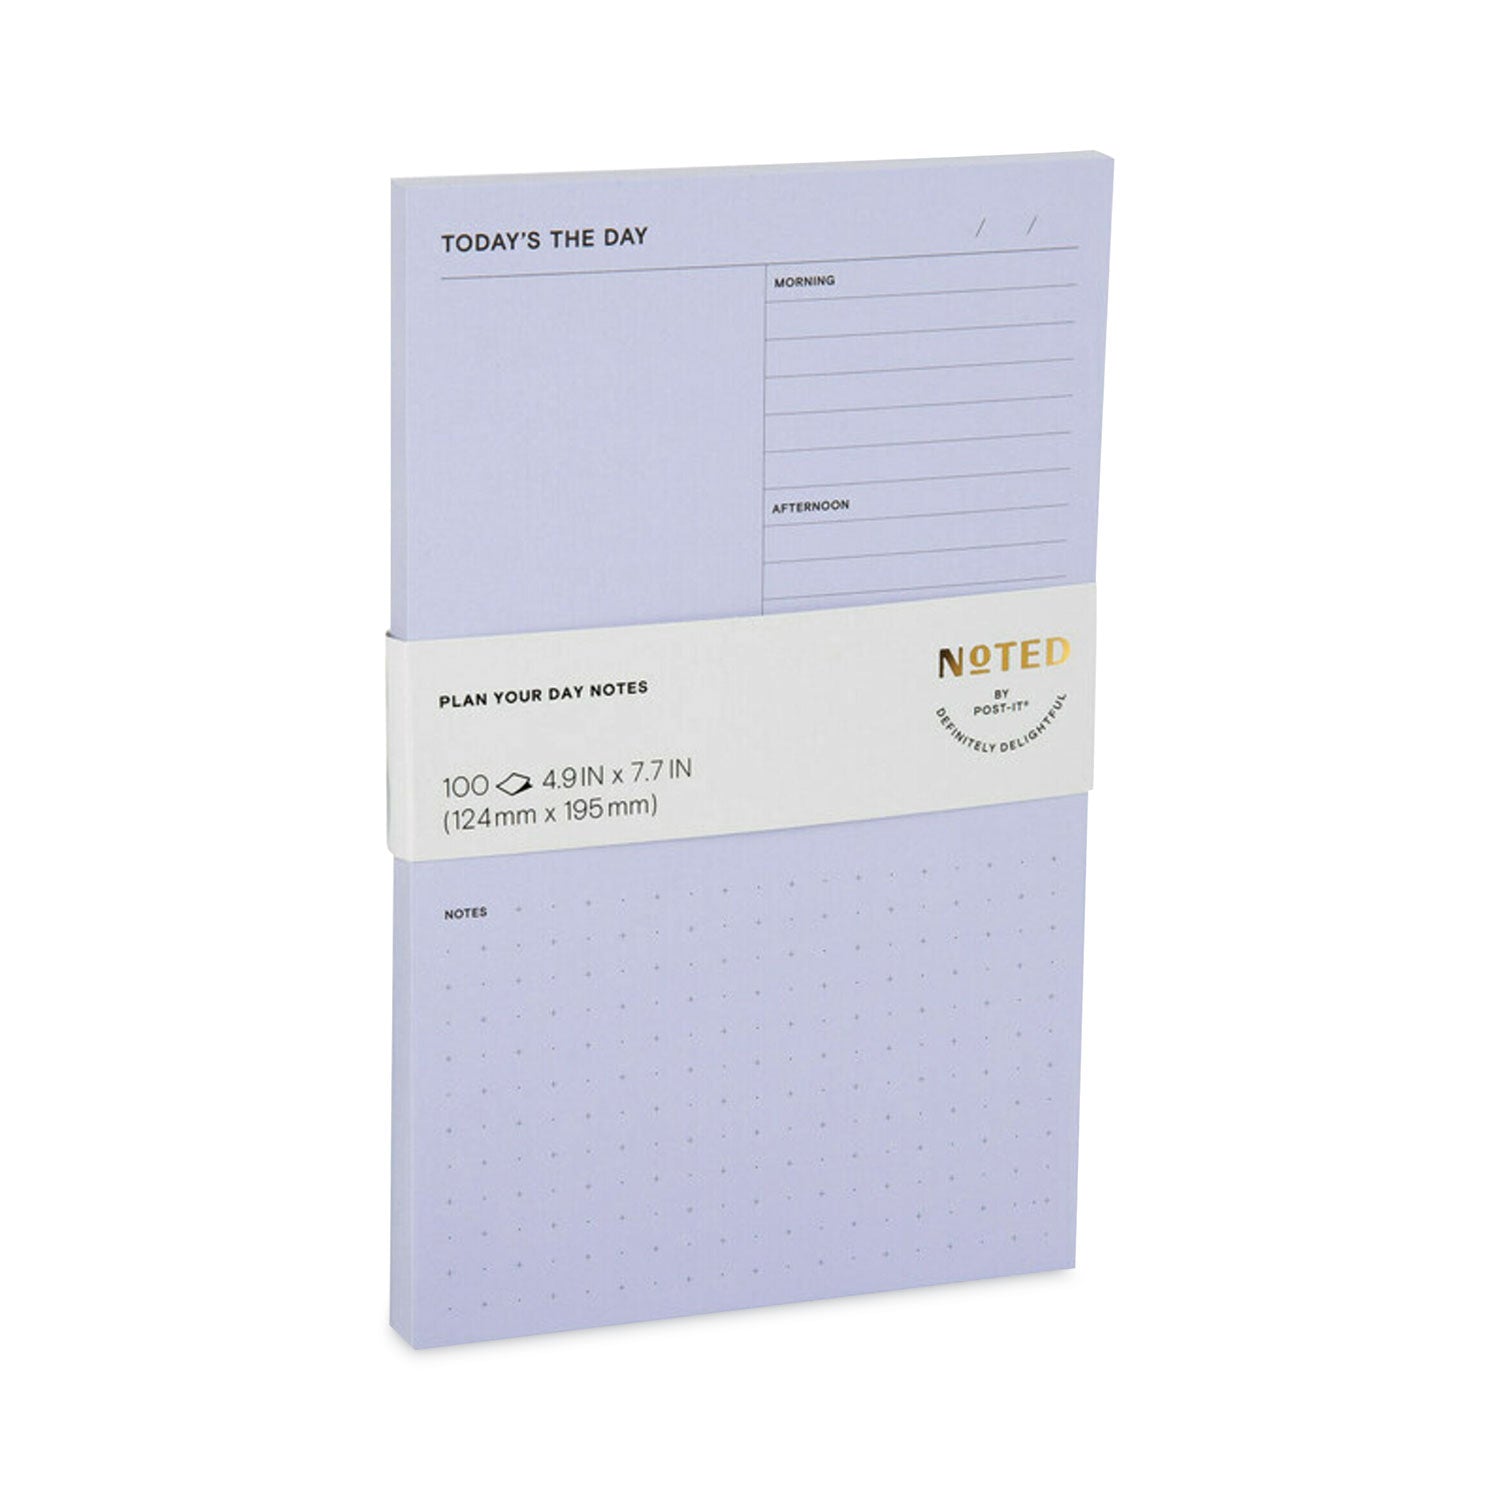 adhesive-daily-planner-sticky-note-pads-daily-planner-format-49-x-77-blue-100-sheets-pad_mmm58blu - 4